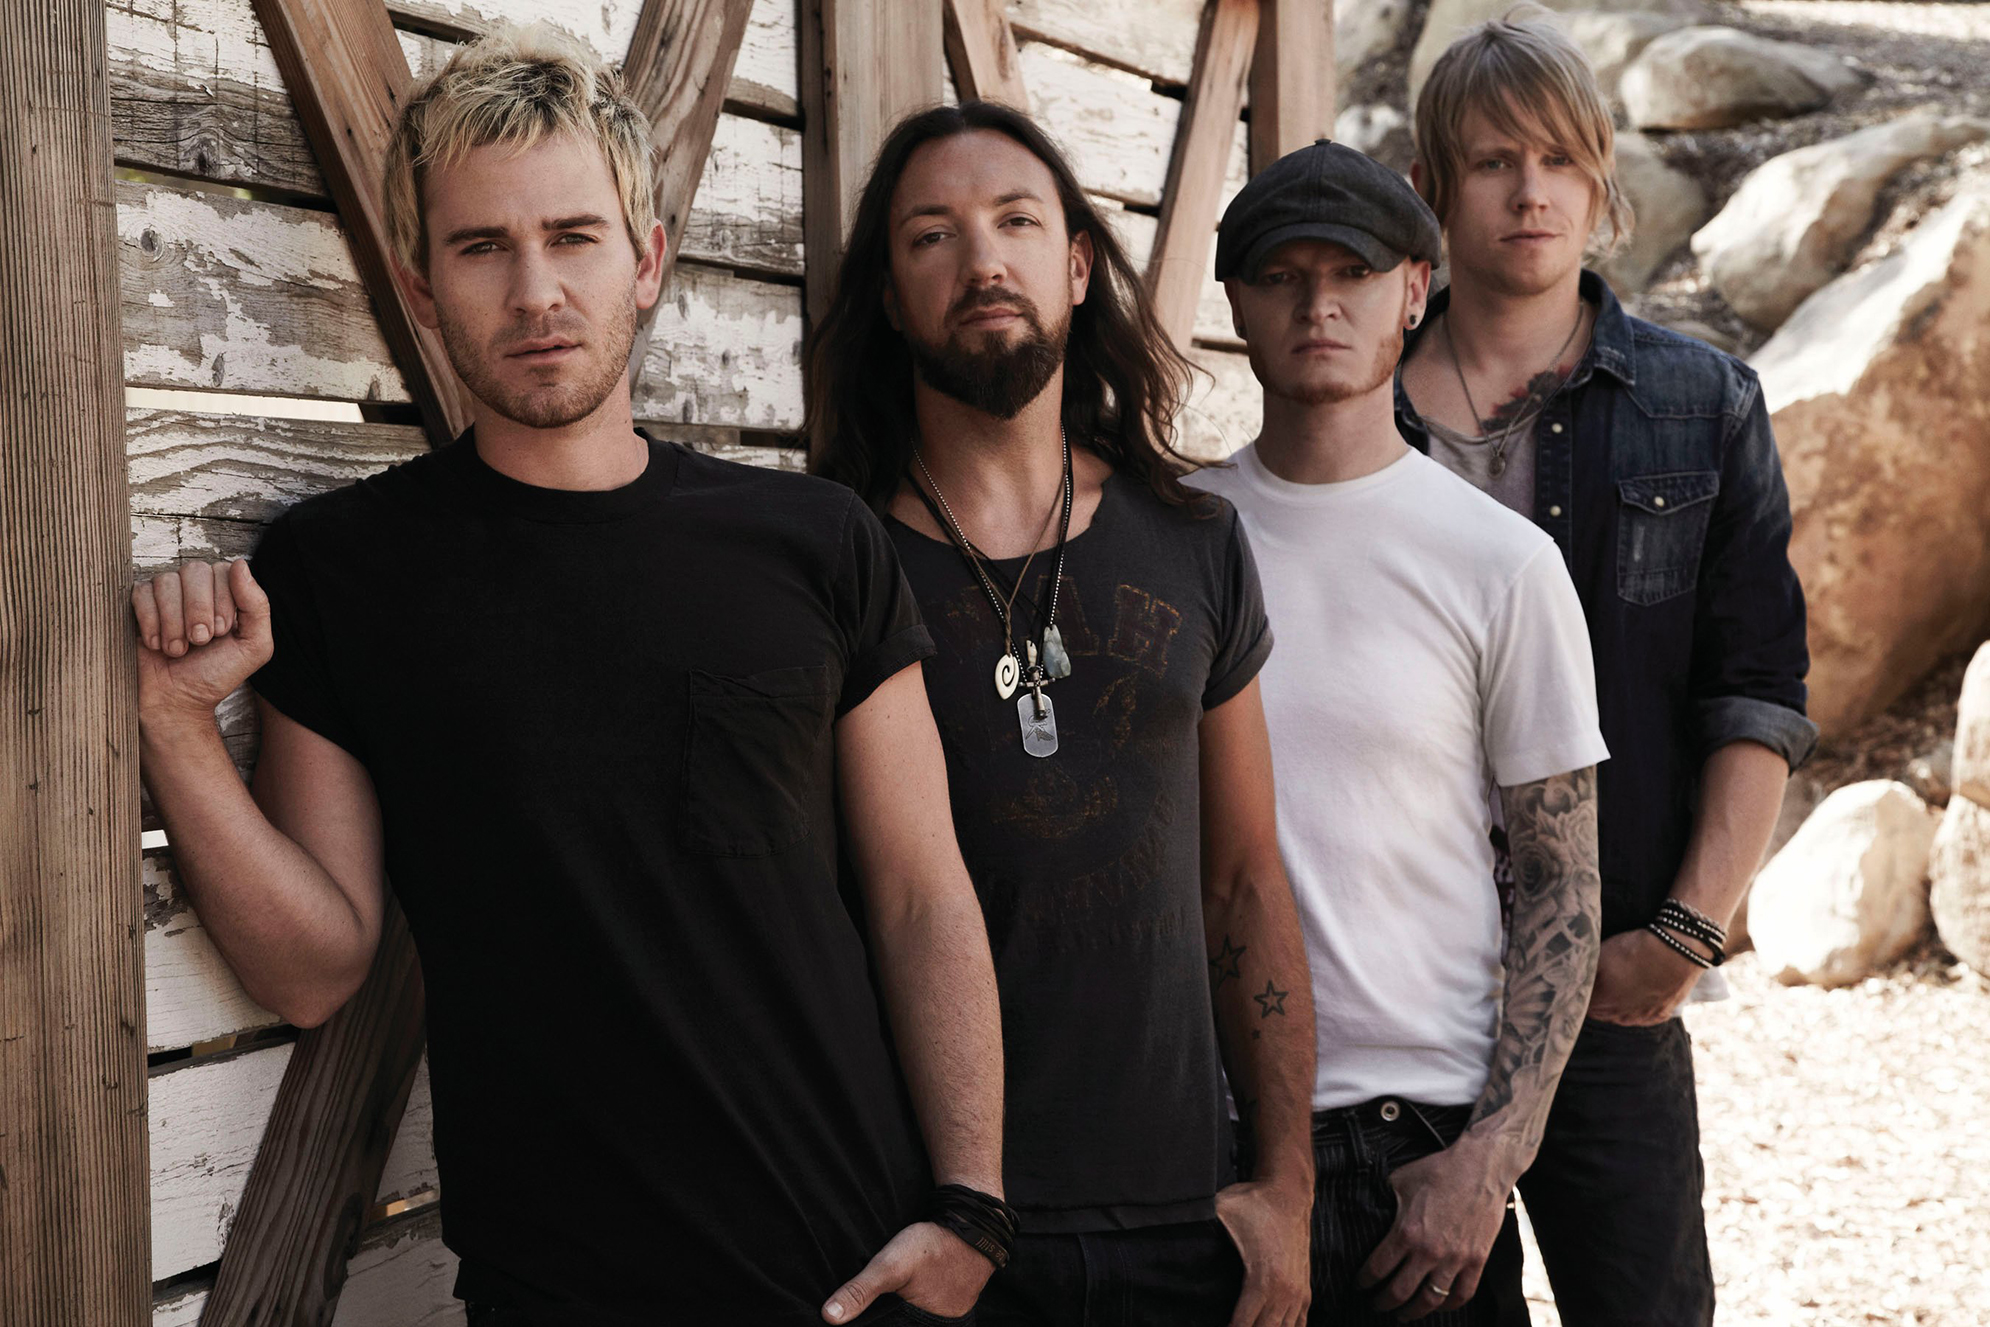 Lifehouse Wallpapers